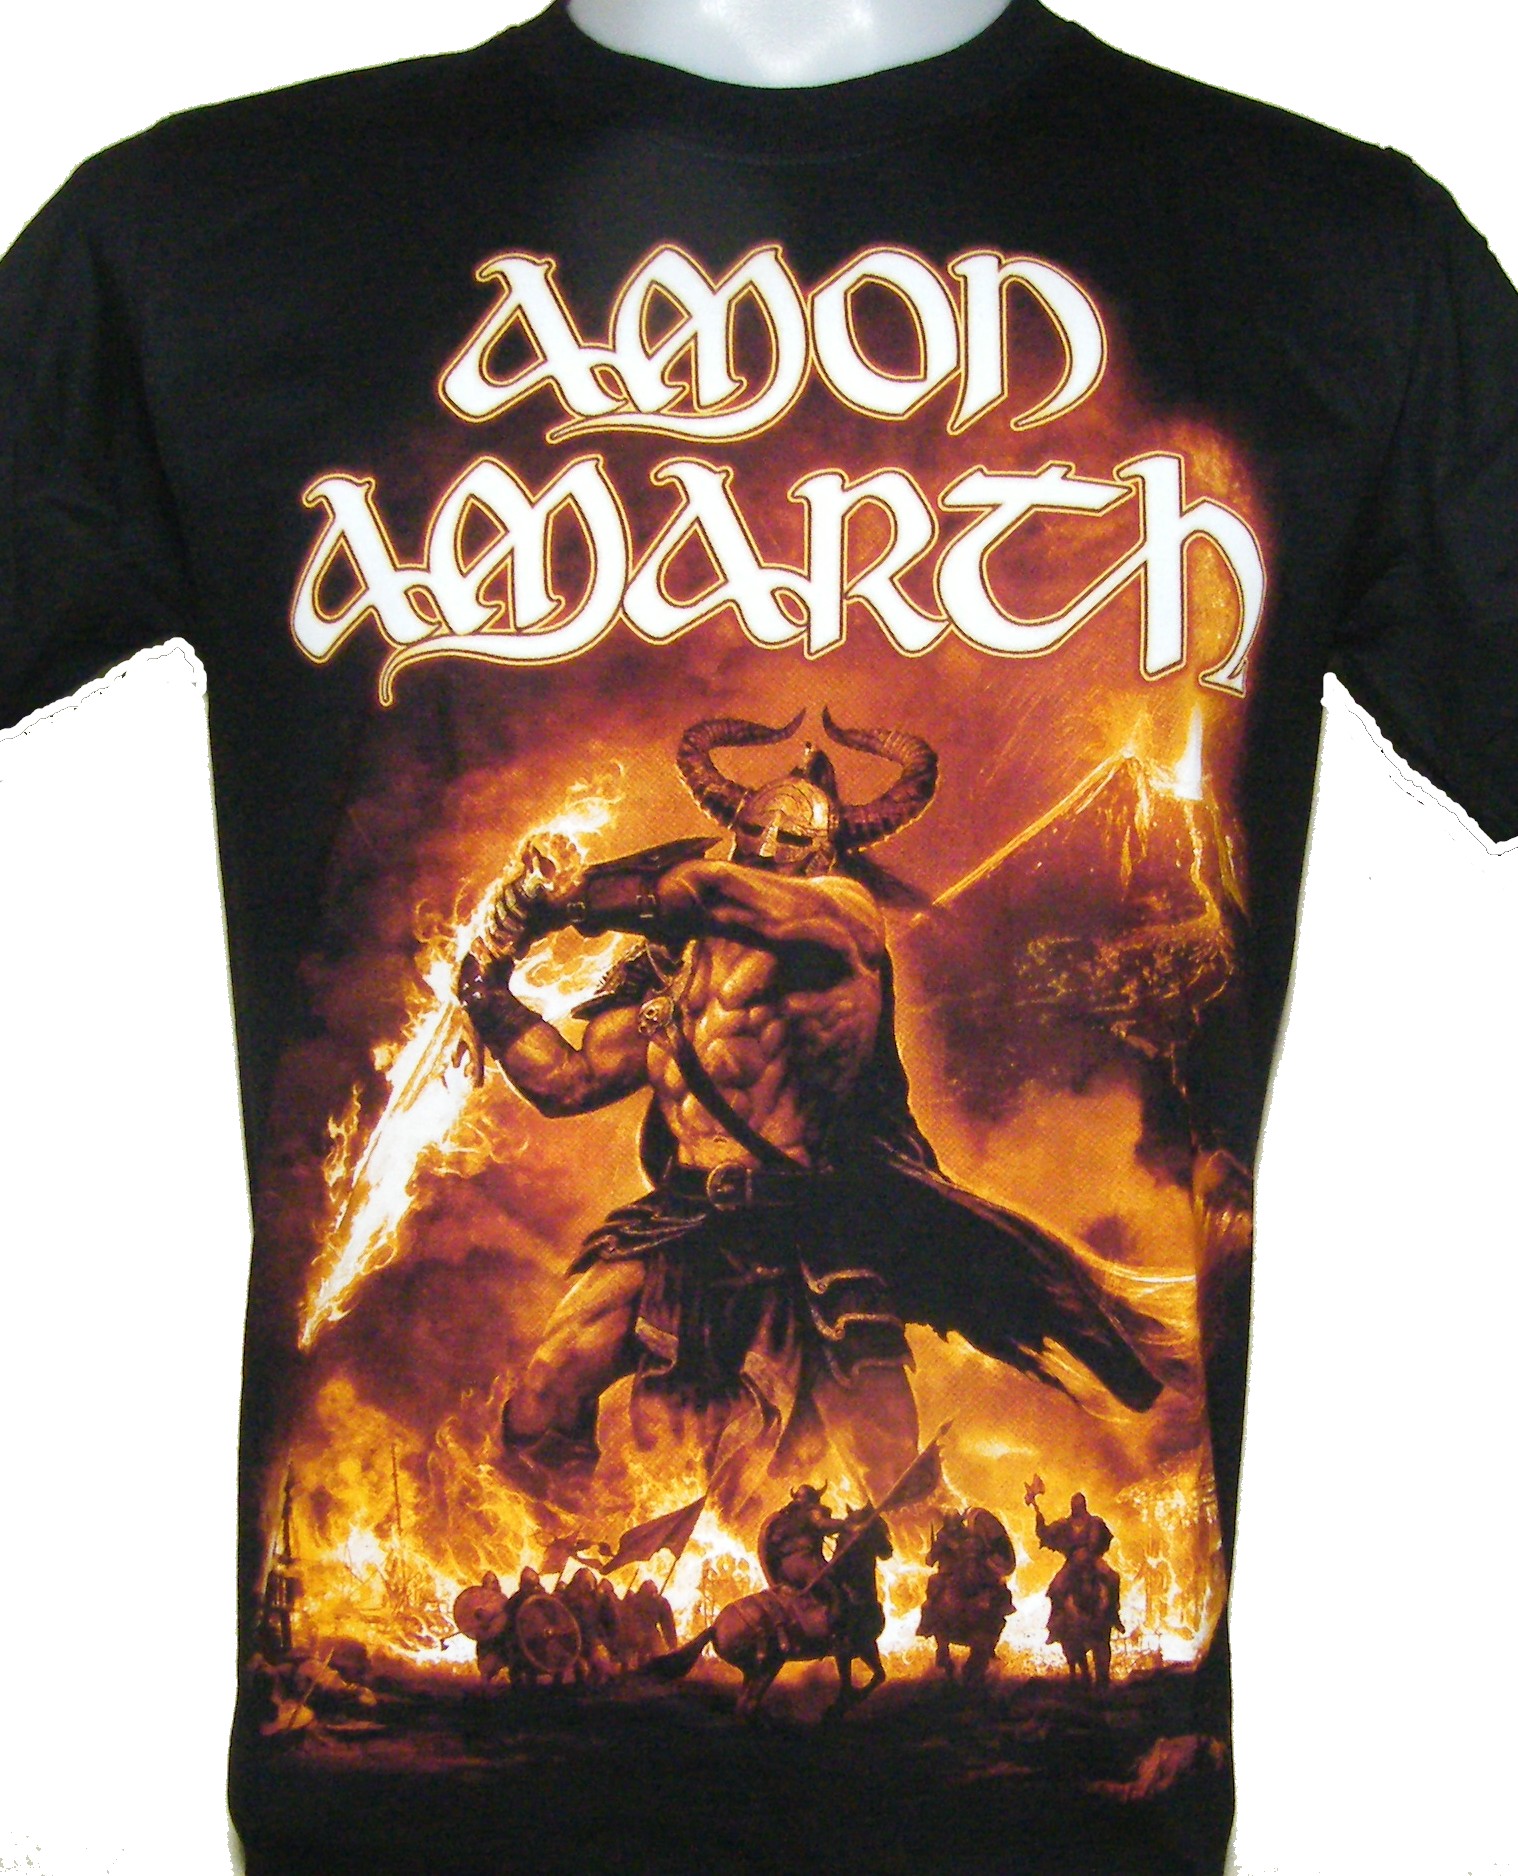 Amon Amarth T Shirt Size L Roxxbkk Amon amarth has released ten albums some of them victoriously cracking the top ten in sweden and recent releases have made very strong dents in the us billboard charts. amon amarth t shirt size l roxxbkk